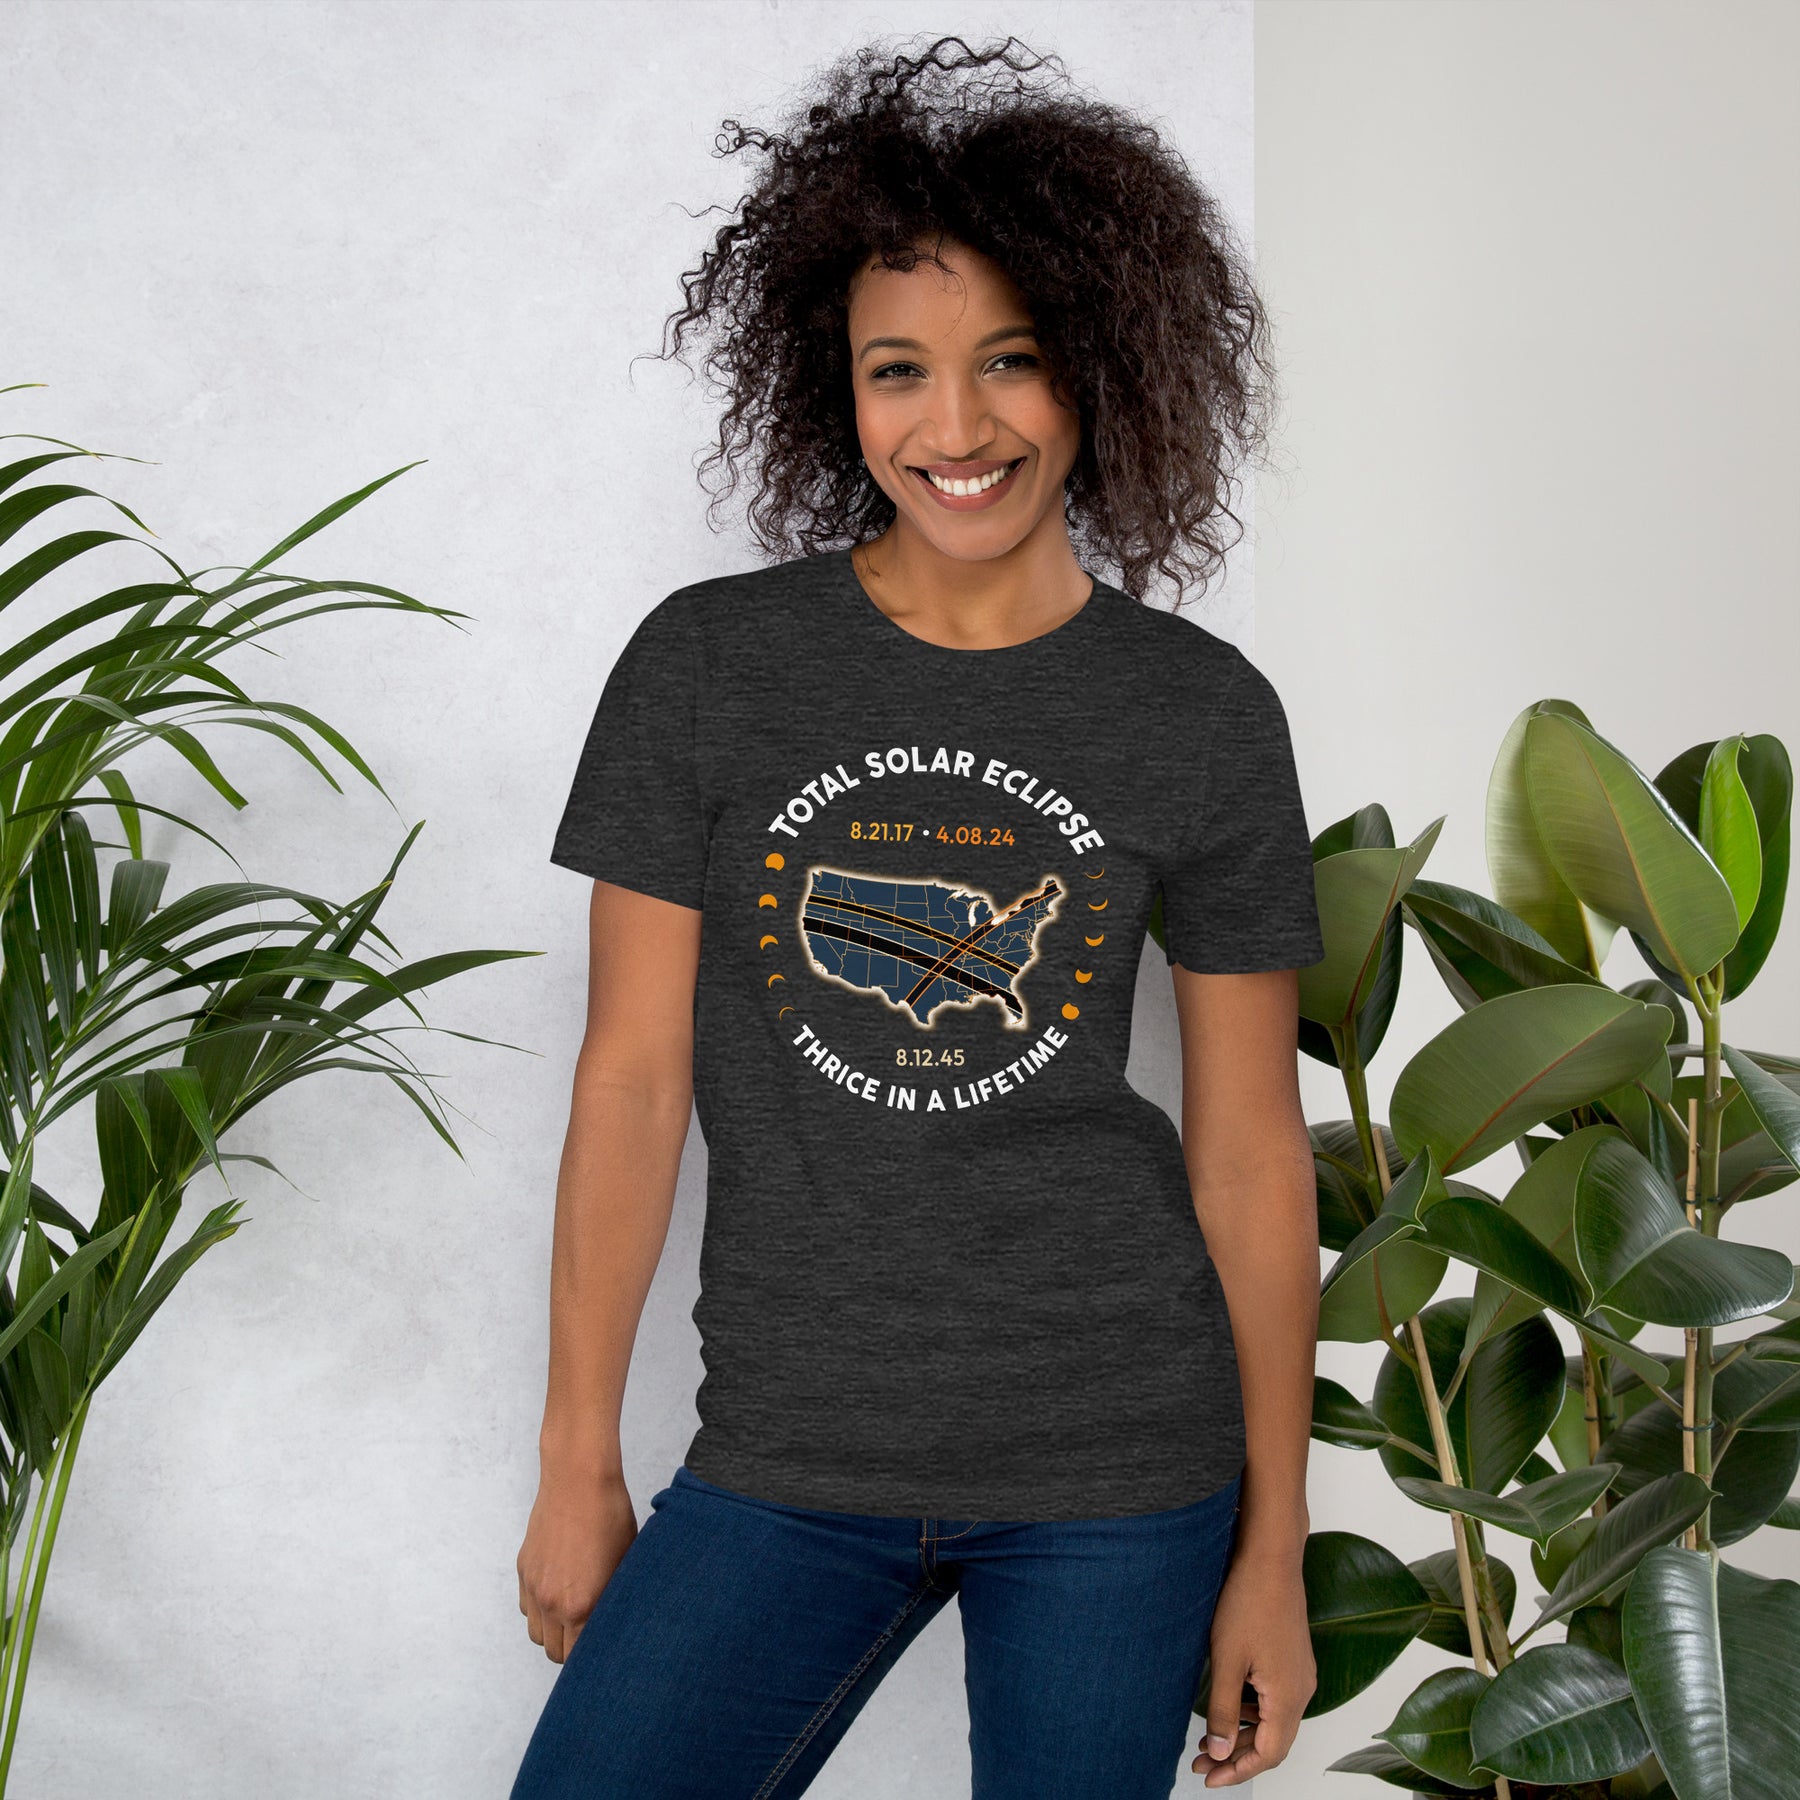 Total Solar Eclipse Thrice In A Lifetime 2017 2024 2045 Totality Shirt, USA North America Eclipse Souvenir